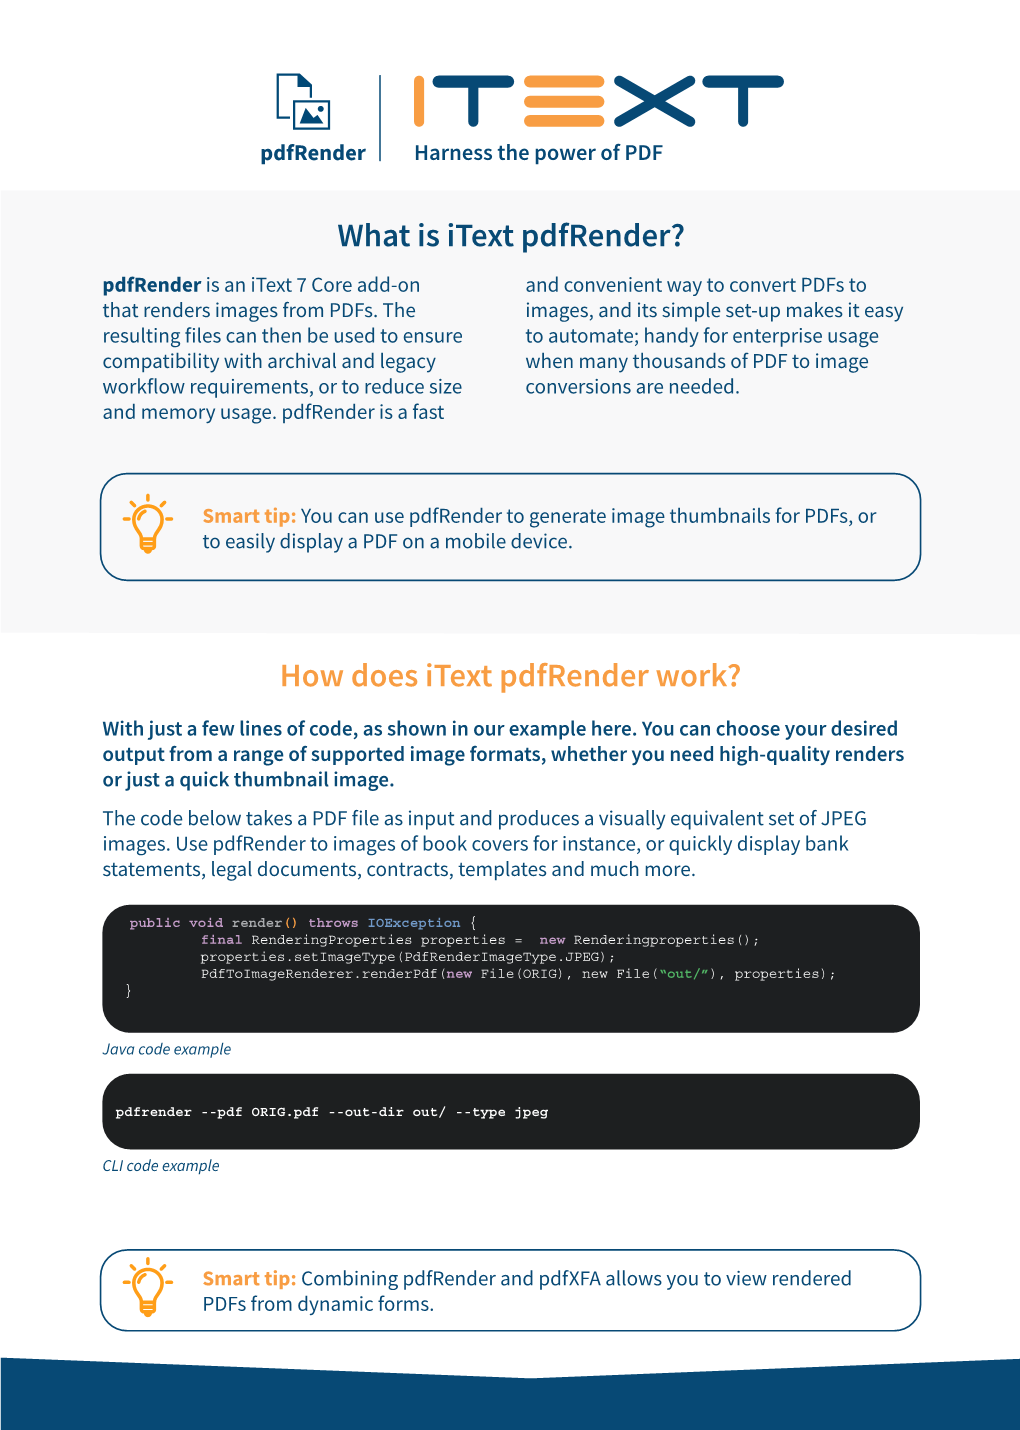 How Does Itext Pdfrender Work?